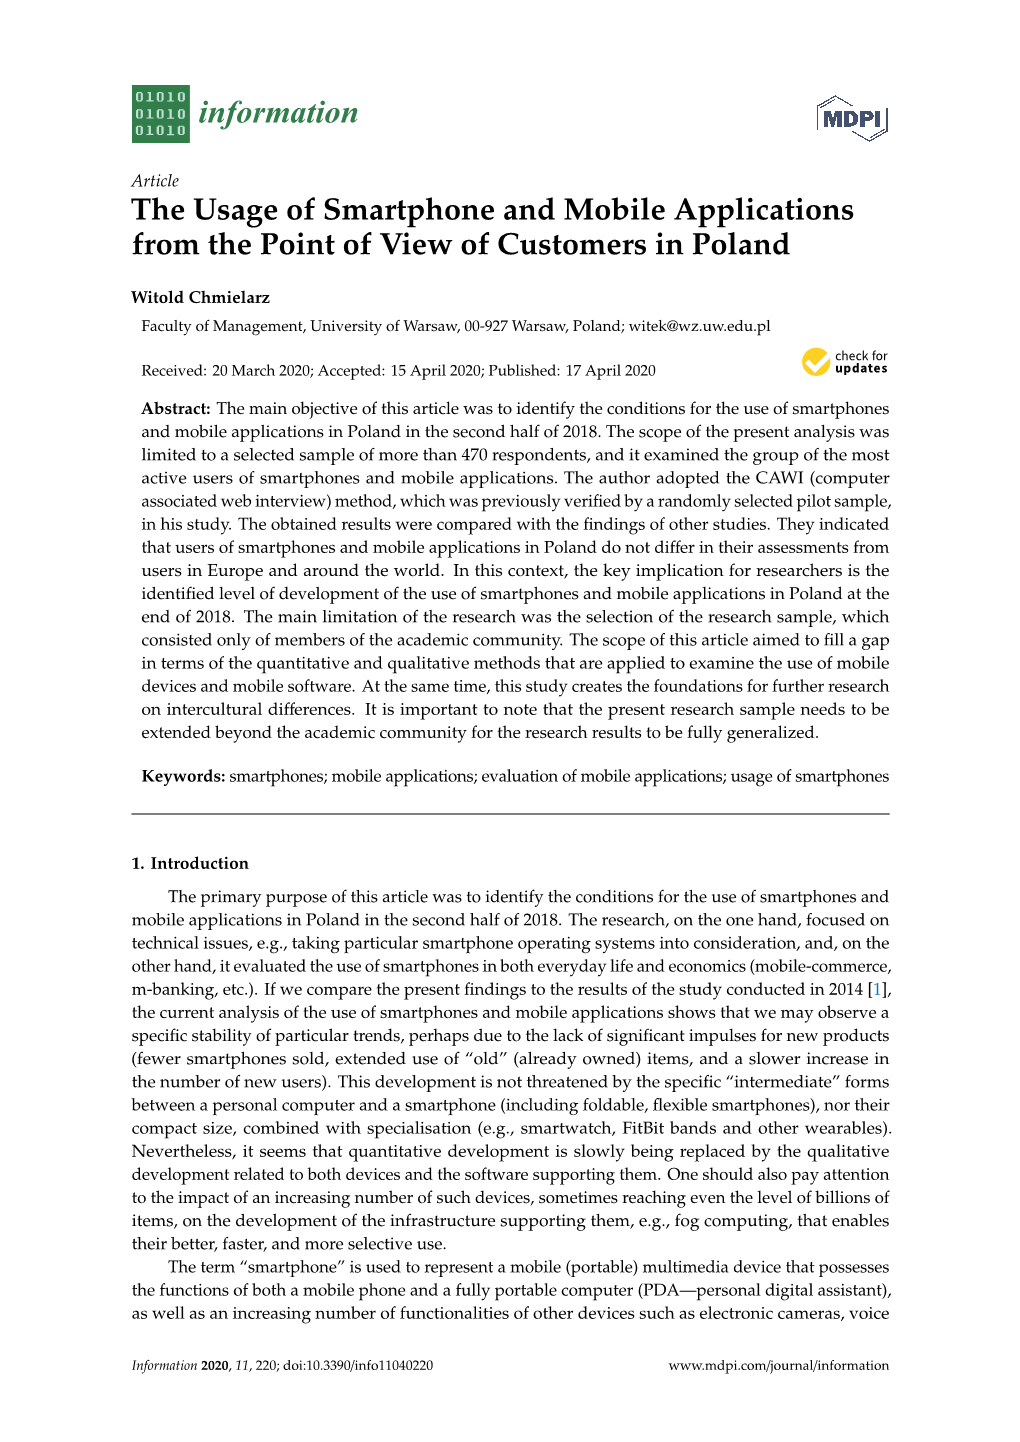 The Usage of Smartphone and Mobile Applications from the Point of View of Customers in Poland